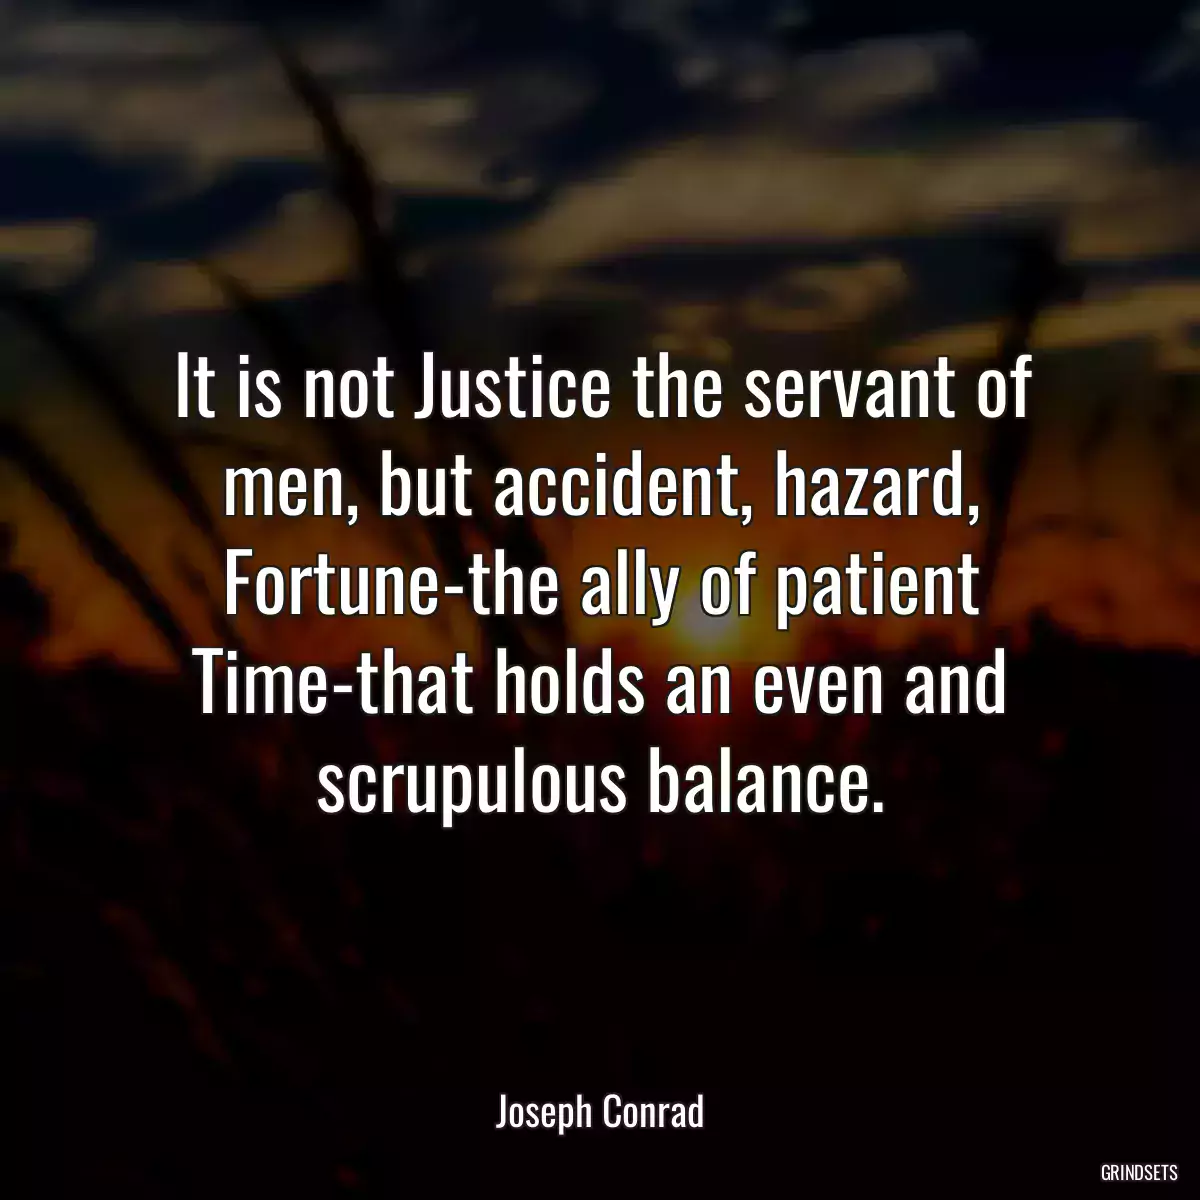 It is not Justice the servant of men, but accident, hazard, Fortune-the ally of patient Time-that holds an even and scrupulous balance.